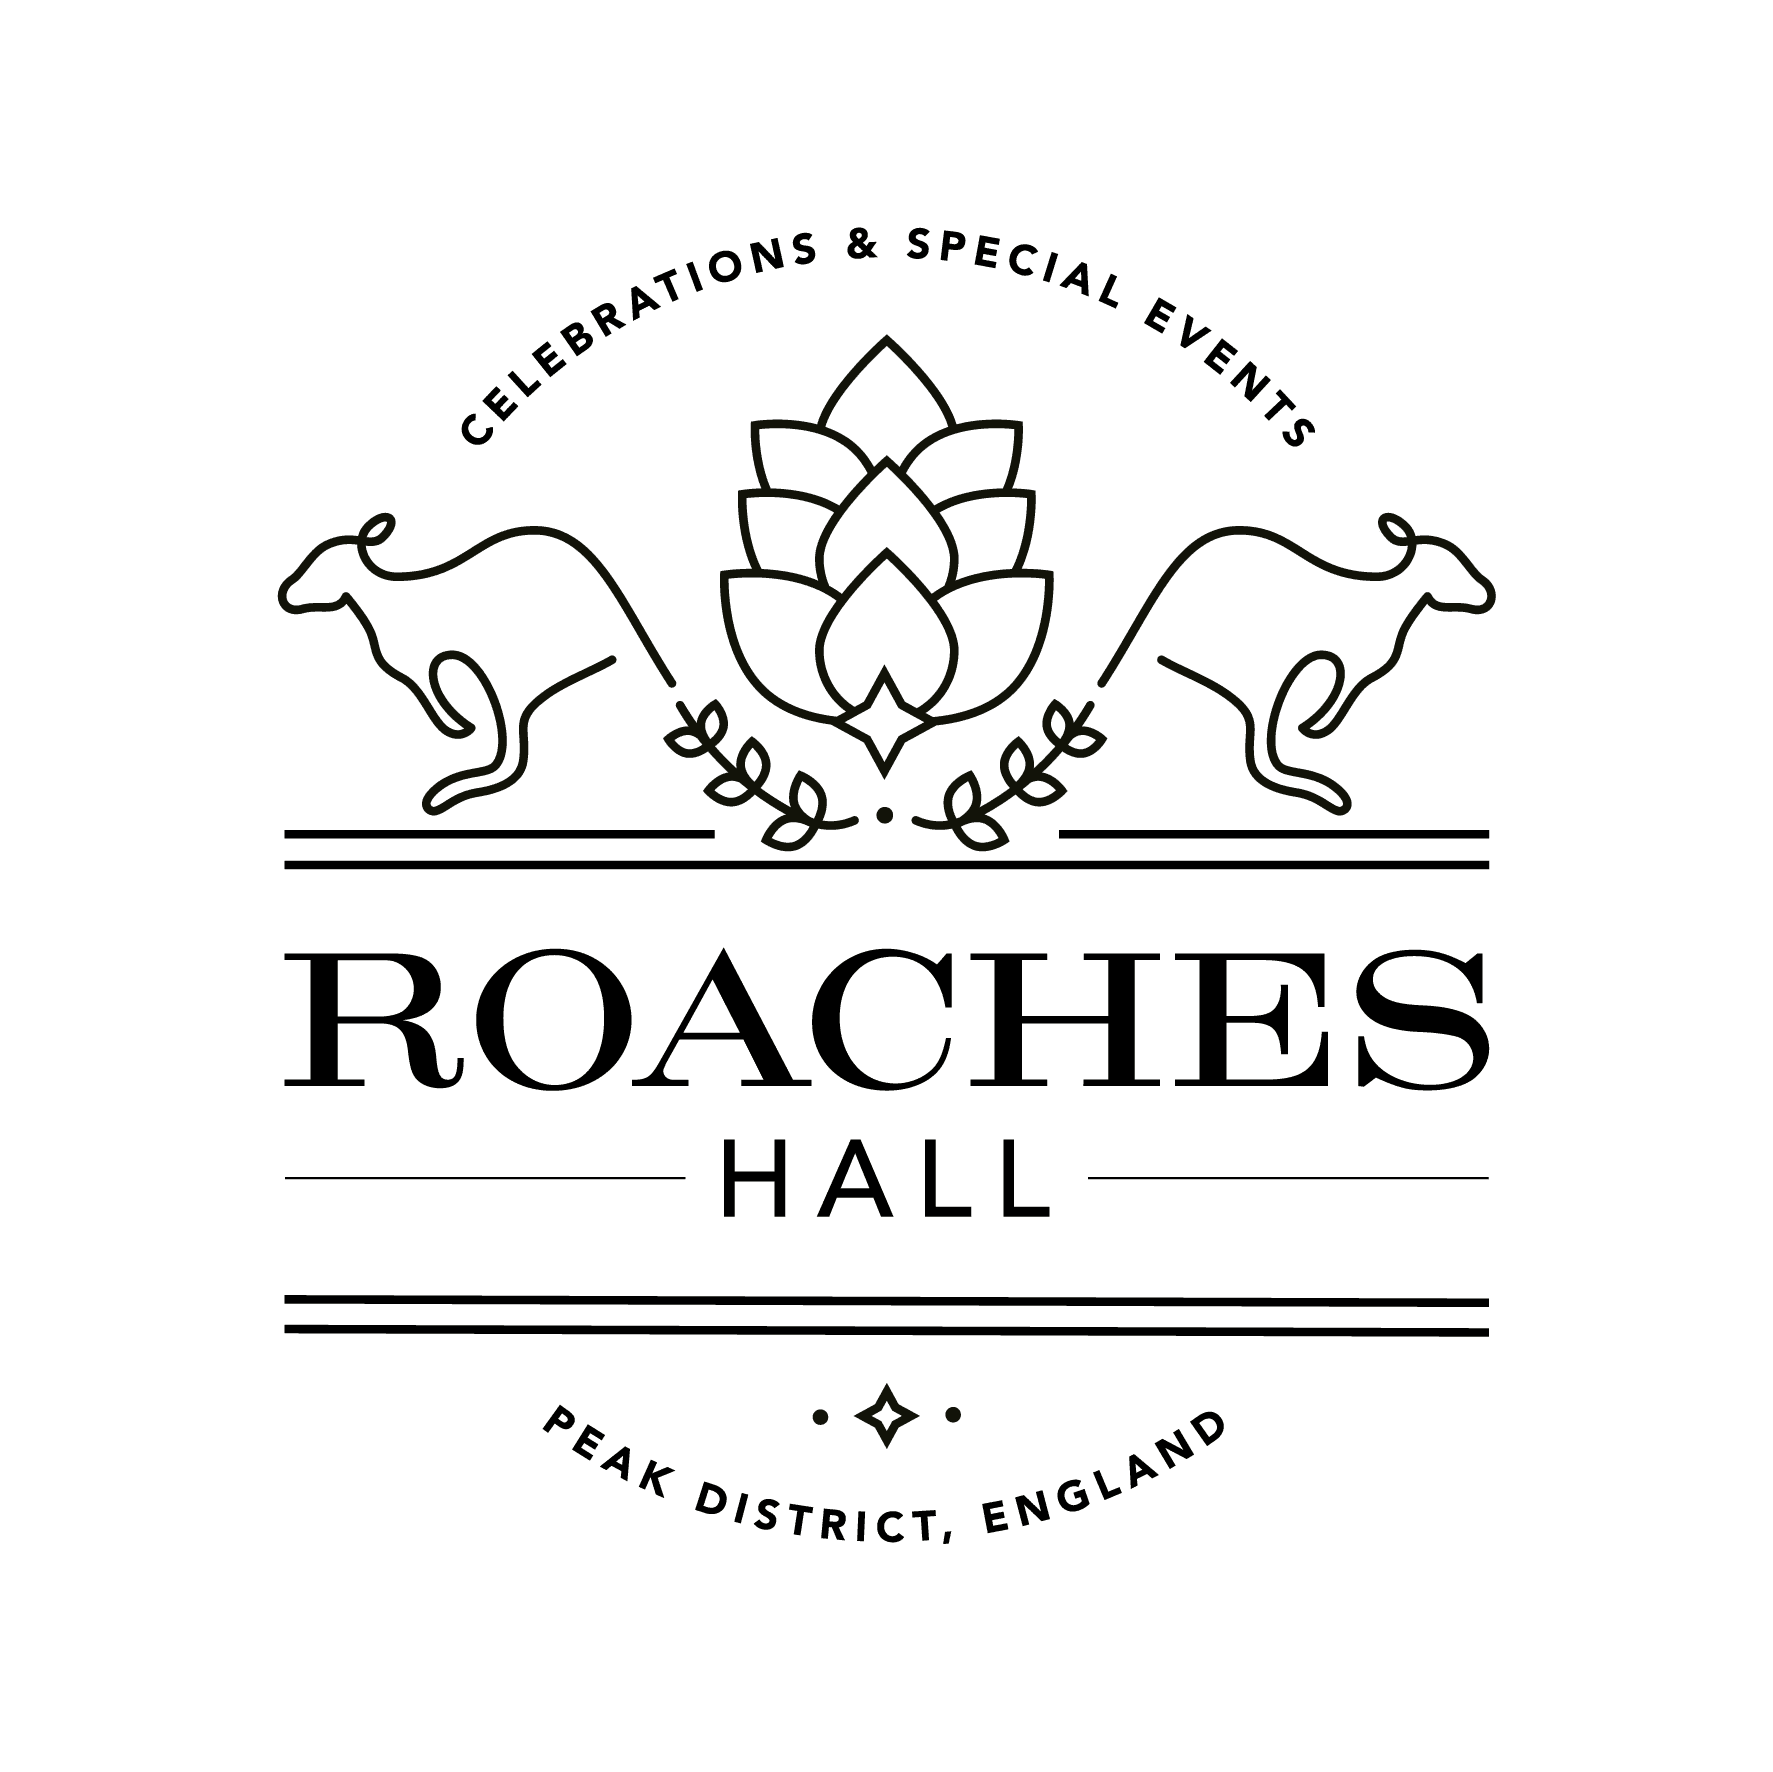 roaches hall for 30 guests logo